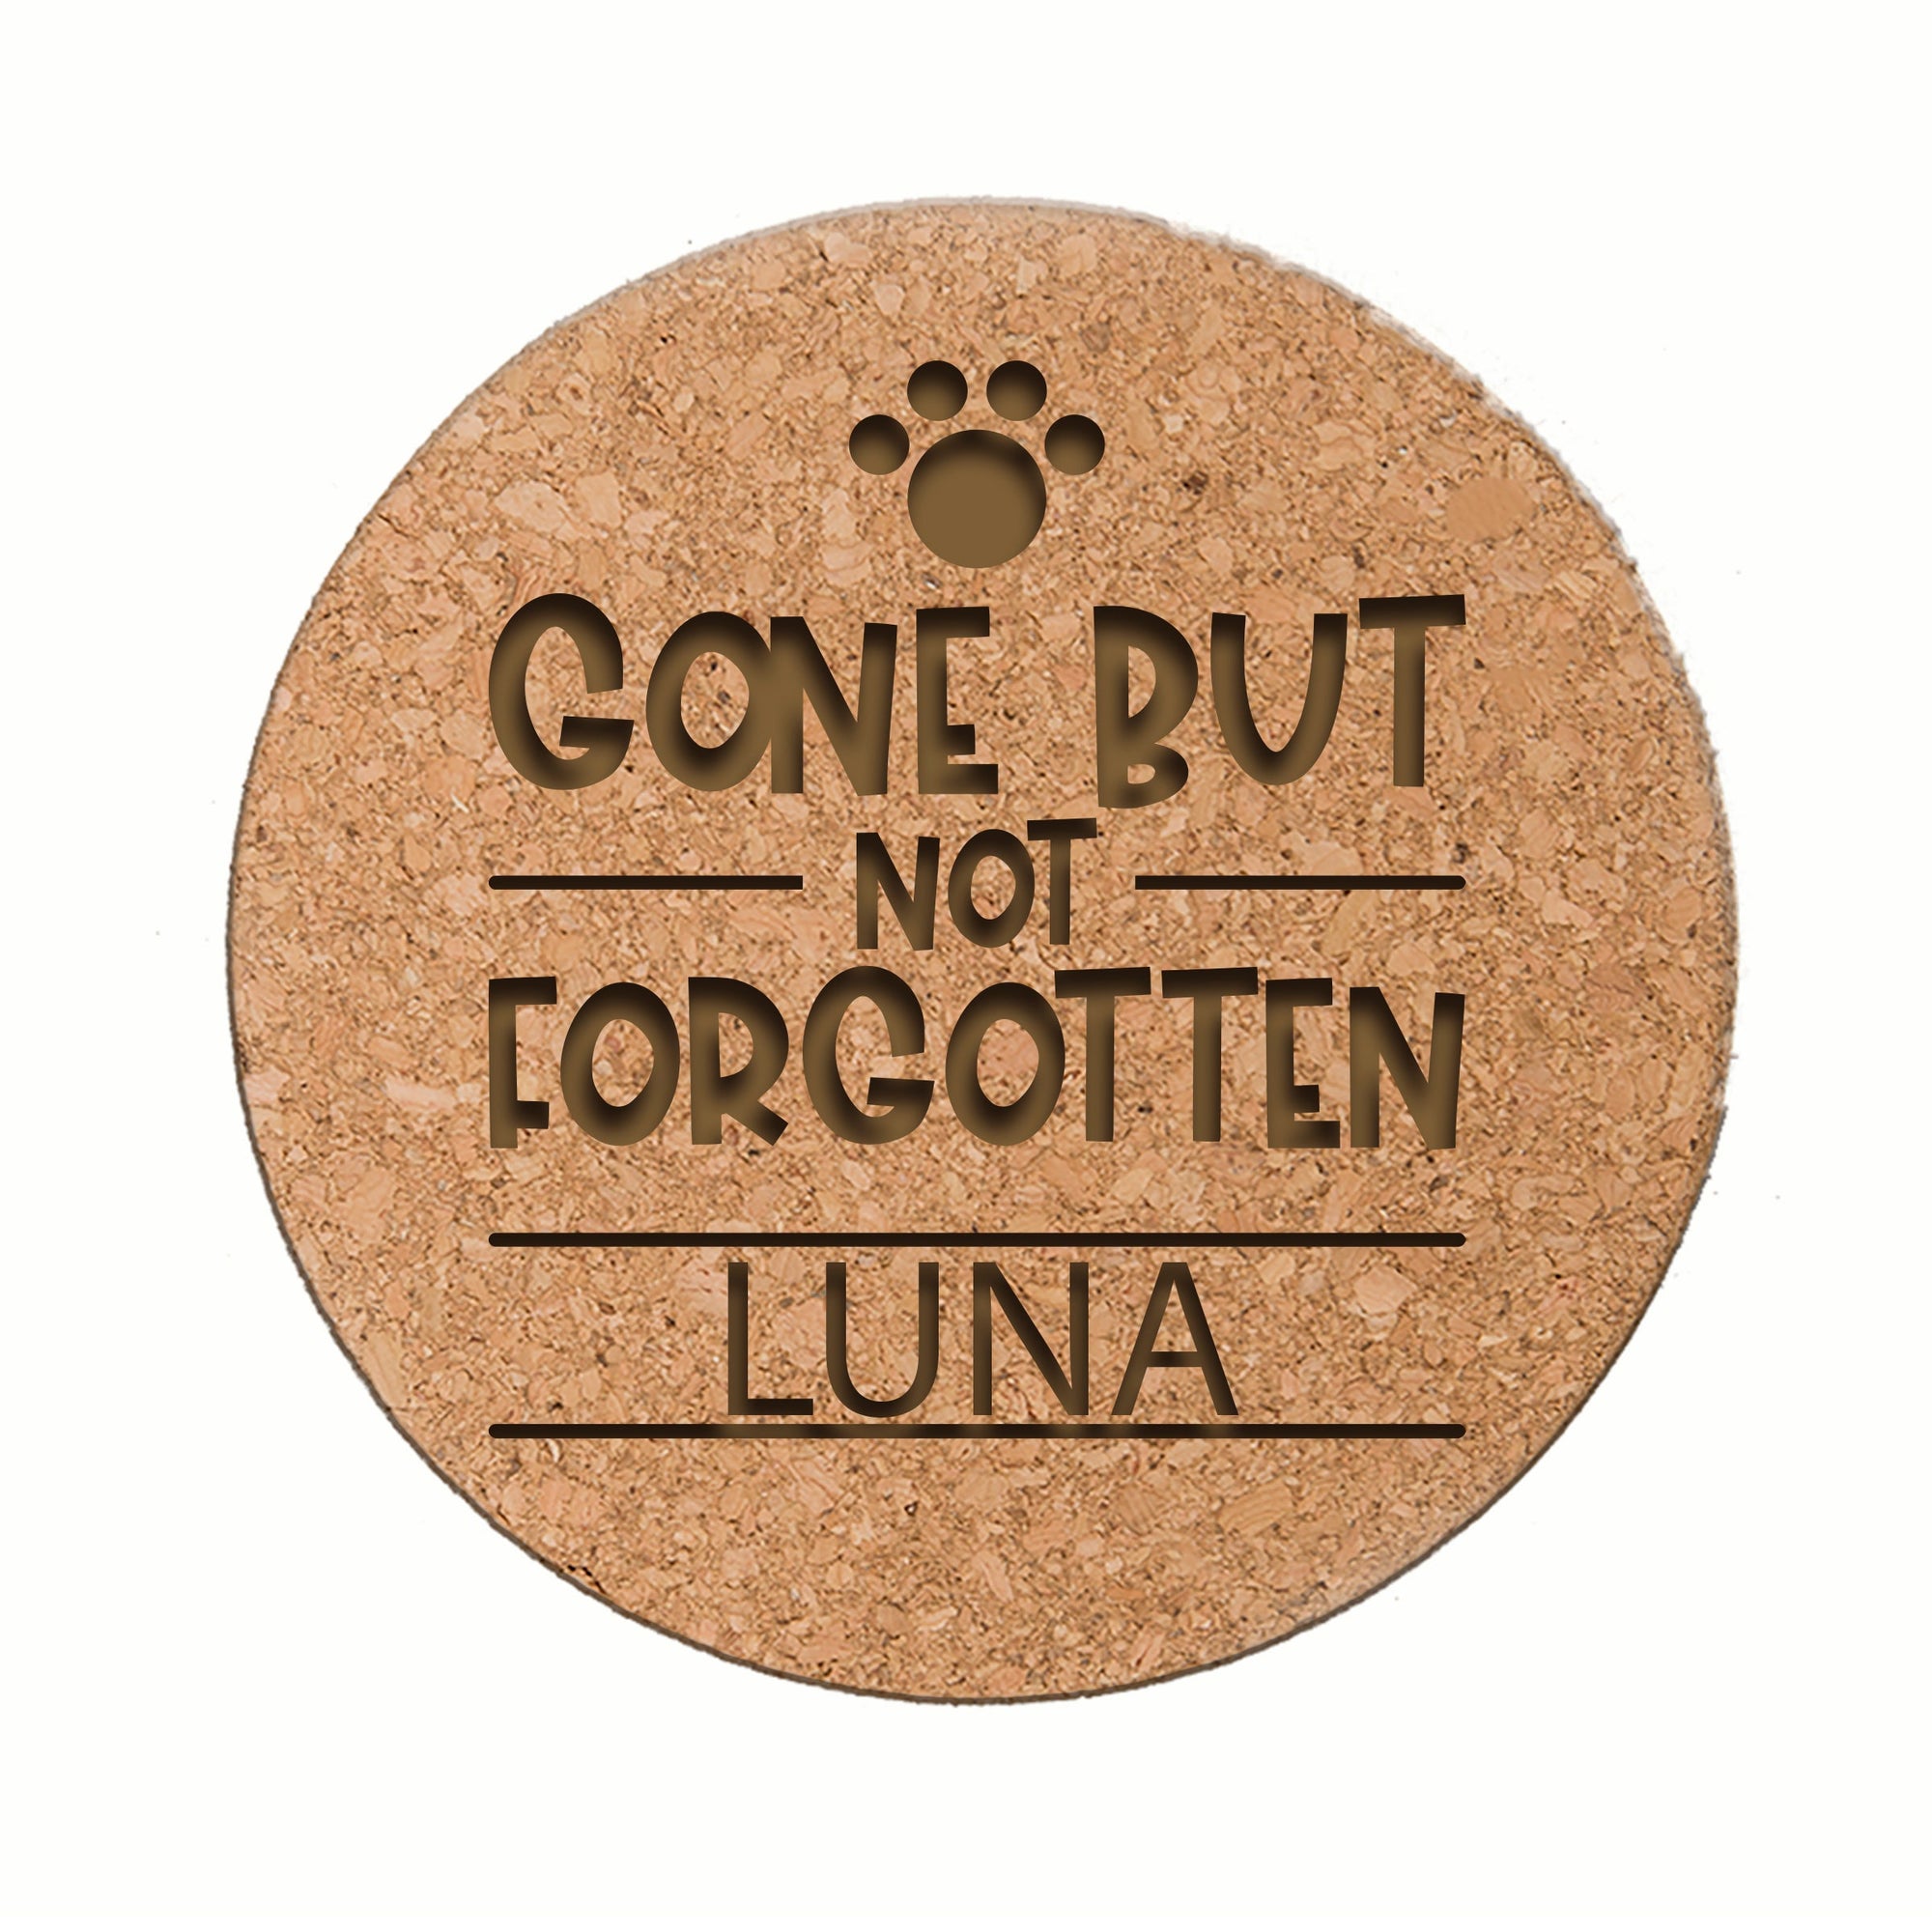 7in Cork Trivet With Phrase "Gone But Not Forgotten."